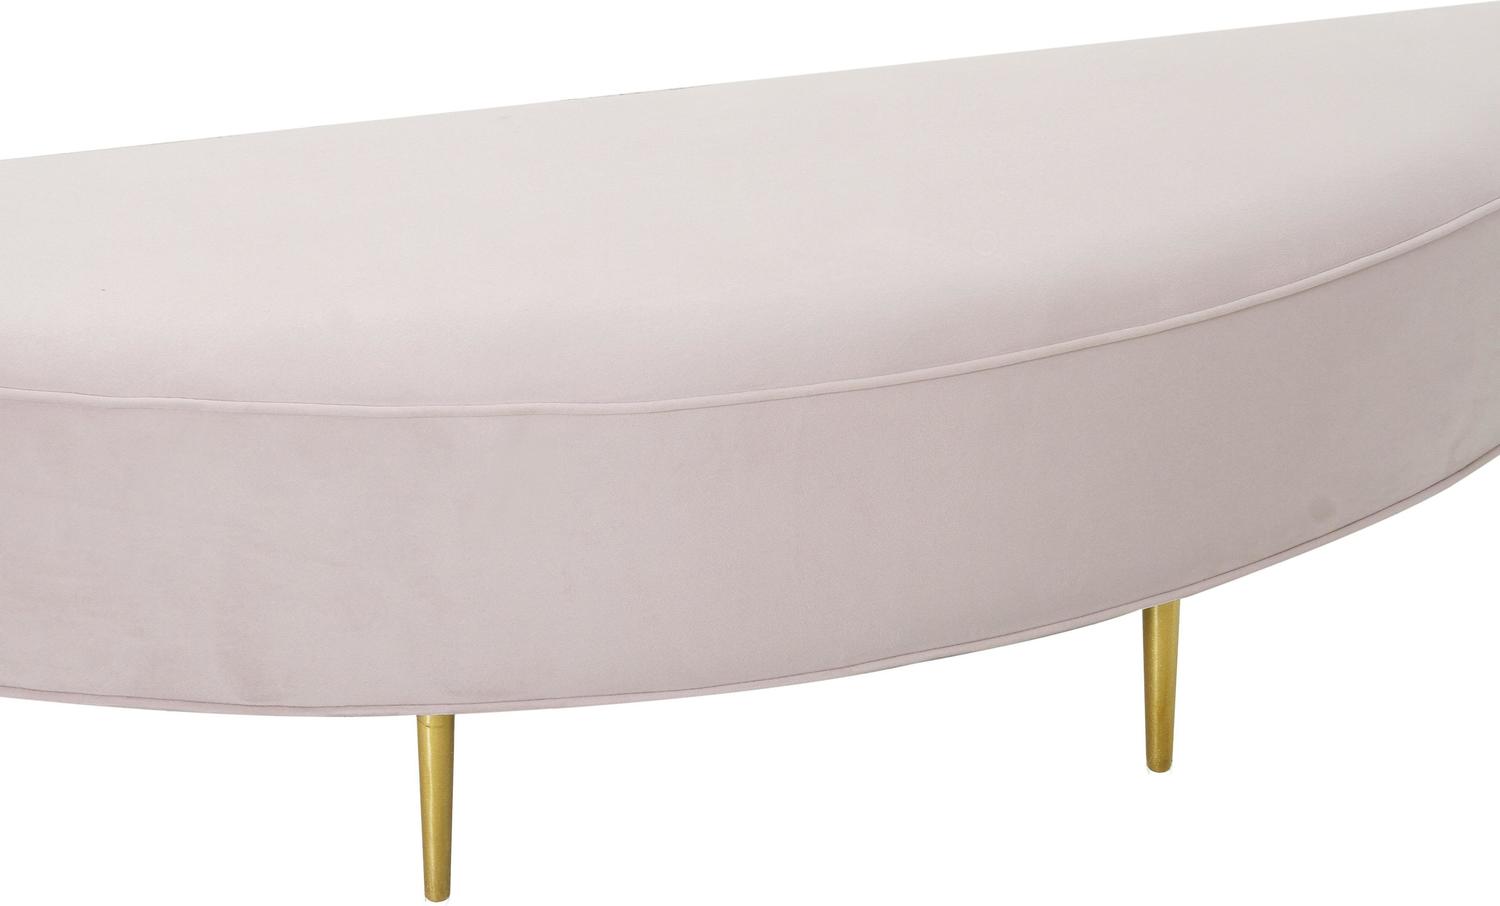 ottomans & footstools Contemporary Design Furniture Benches Blush